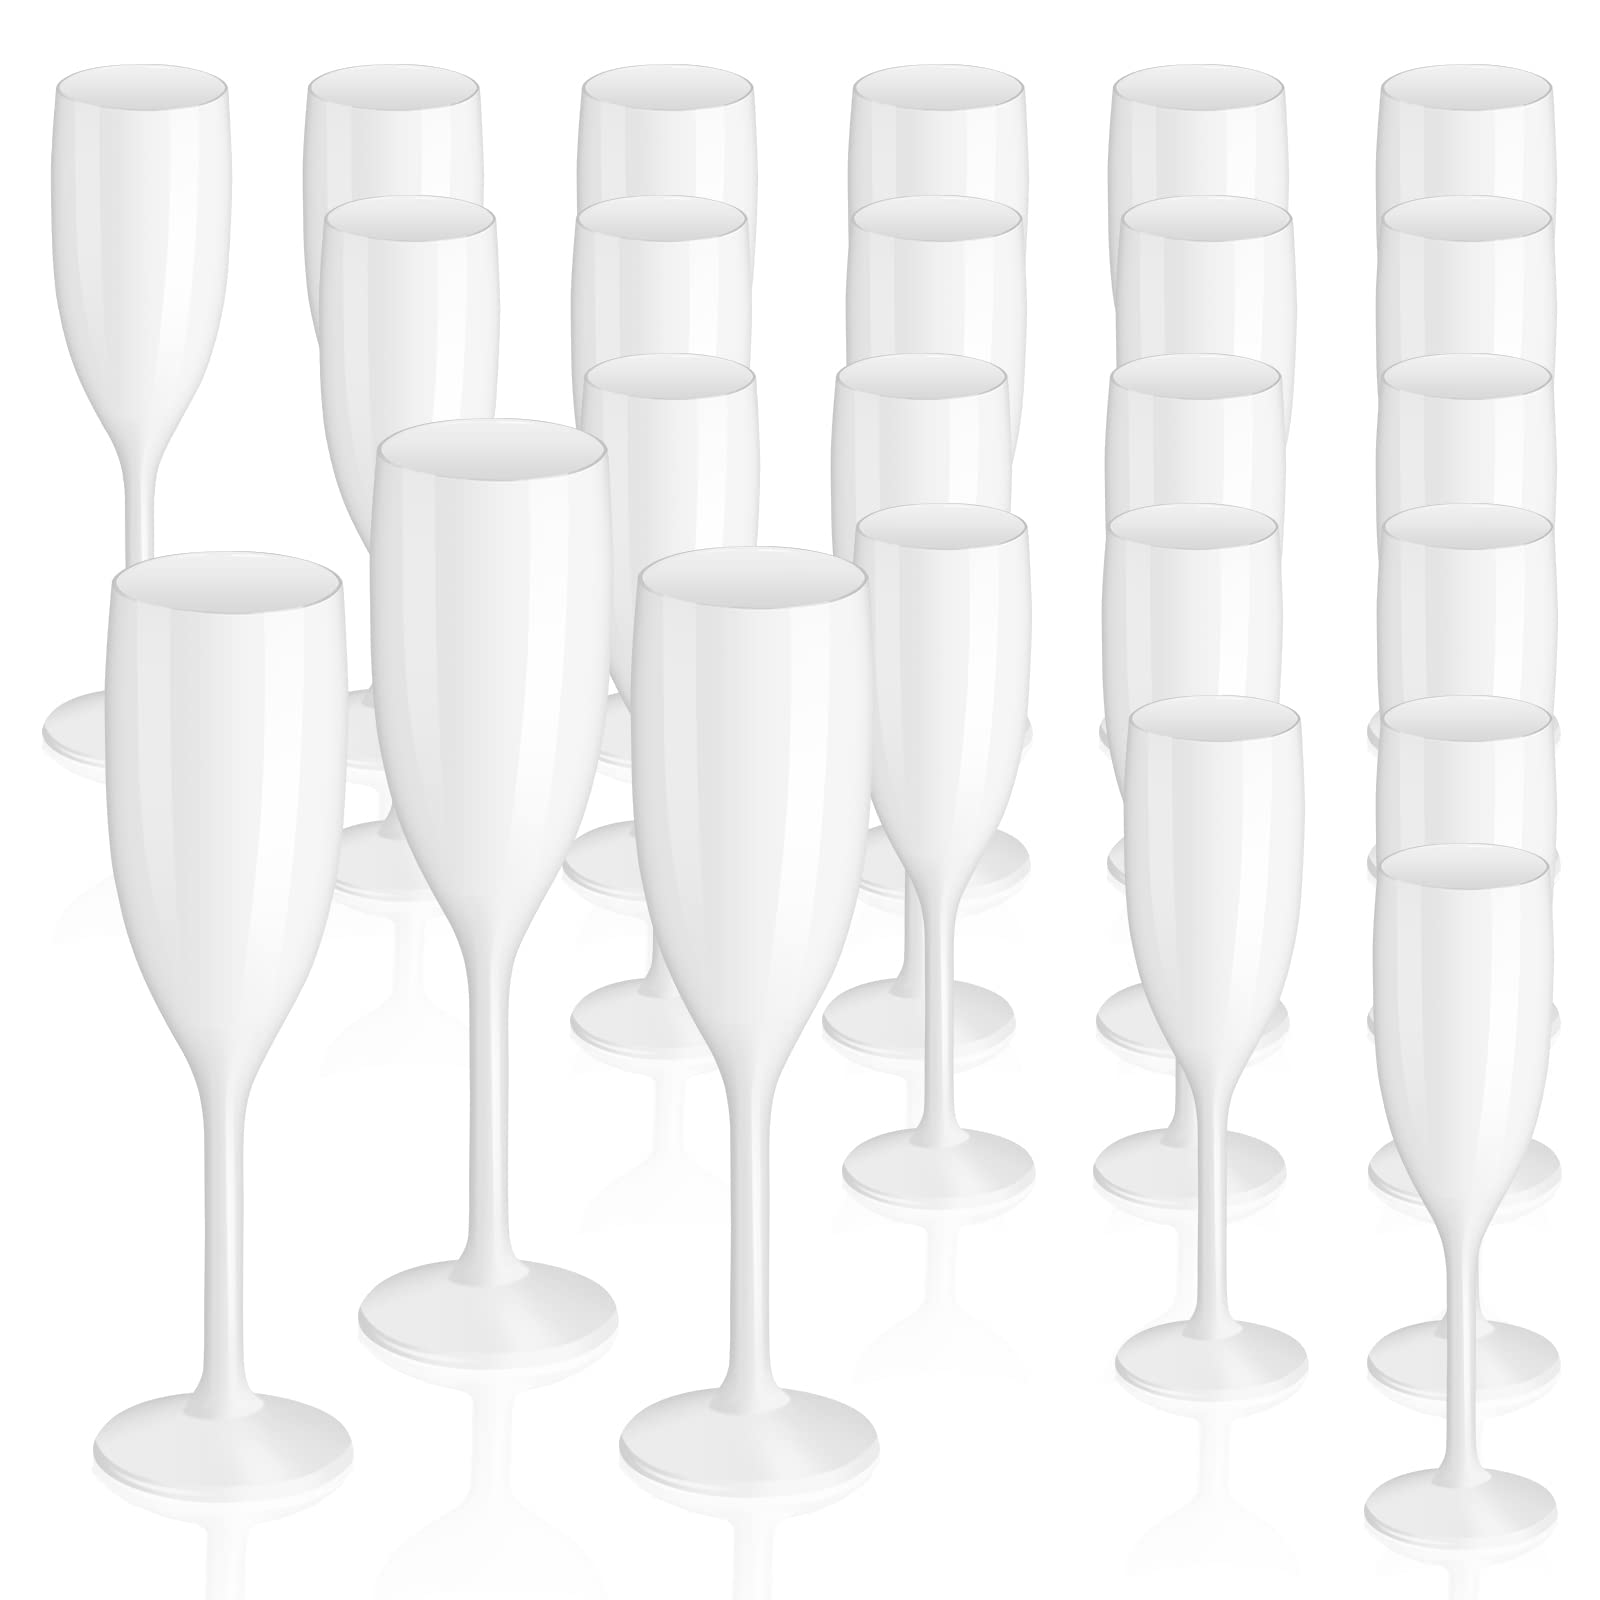 XUWAIDSGN Champagne Flute Acrylic Champagne Glasses Wedding Toasting Champagne Flute Goblet Plastic Reusable Unbreakable Champagne Cups for Bachelorette Wedding Bridal Shower Party (White, 24)